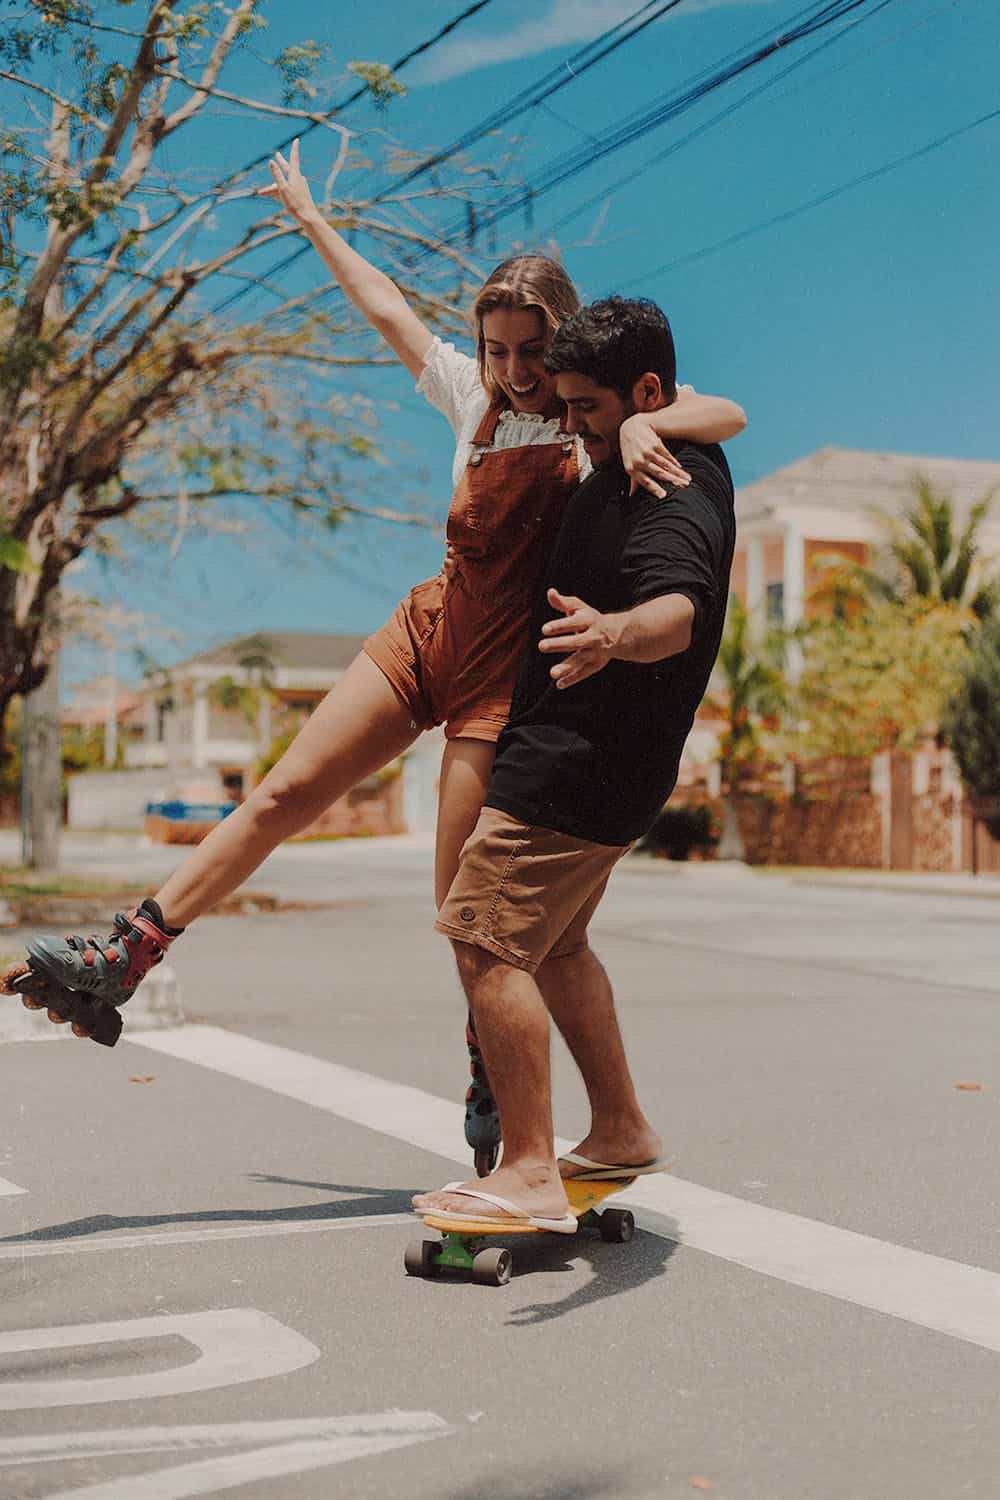 couple roller skating on the street